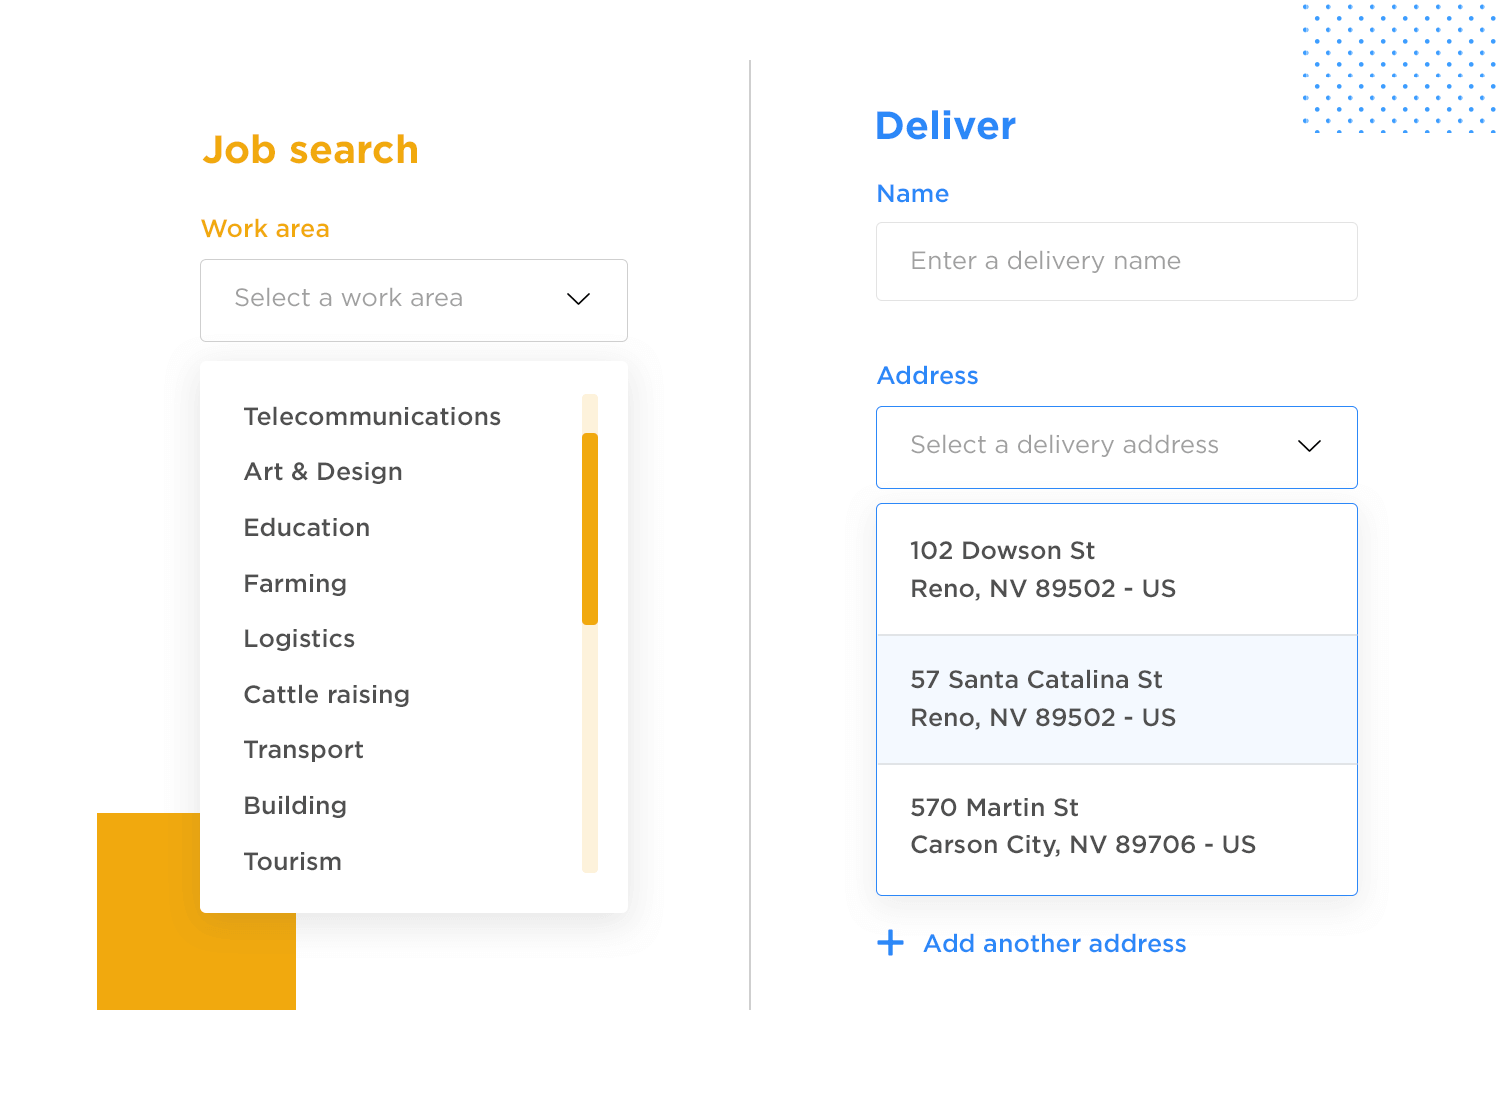 Drop down list design - job categories and delivery addresses